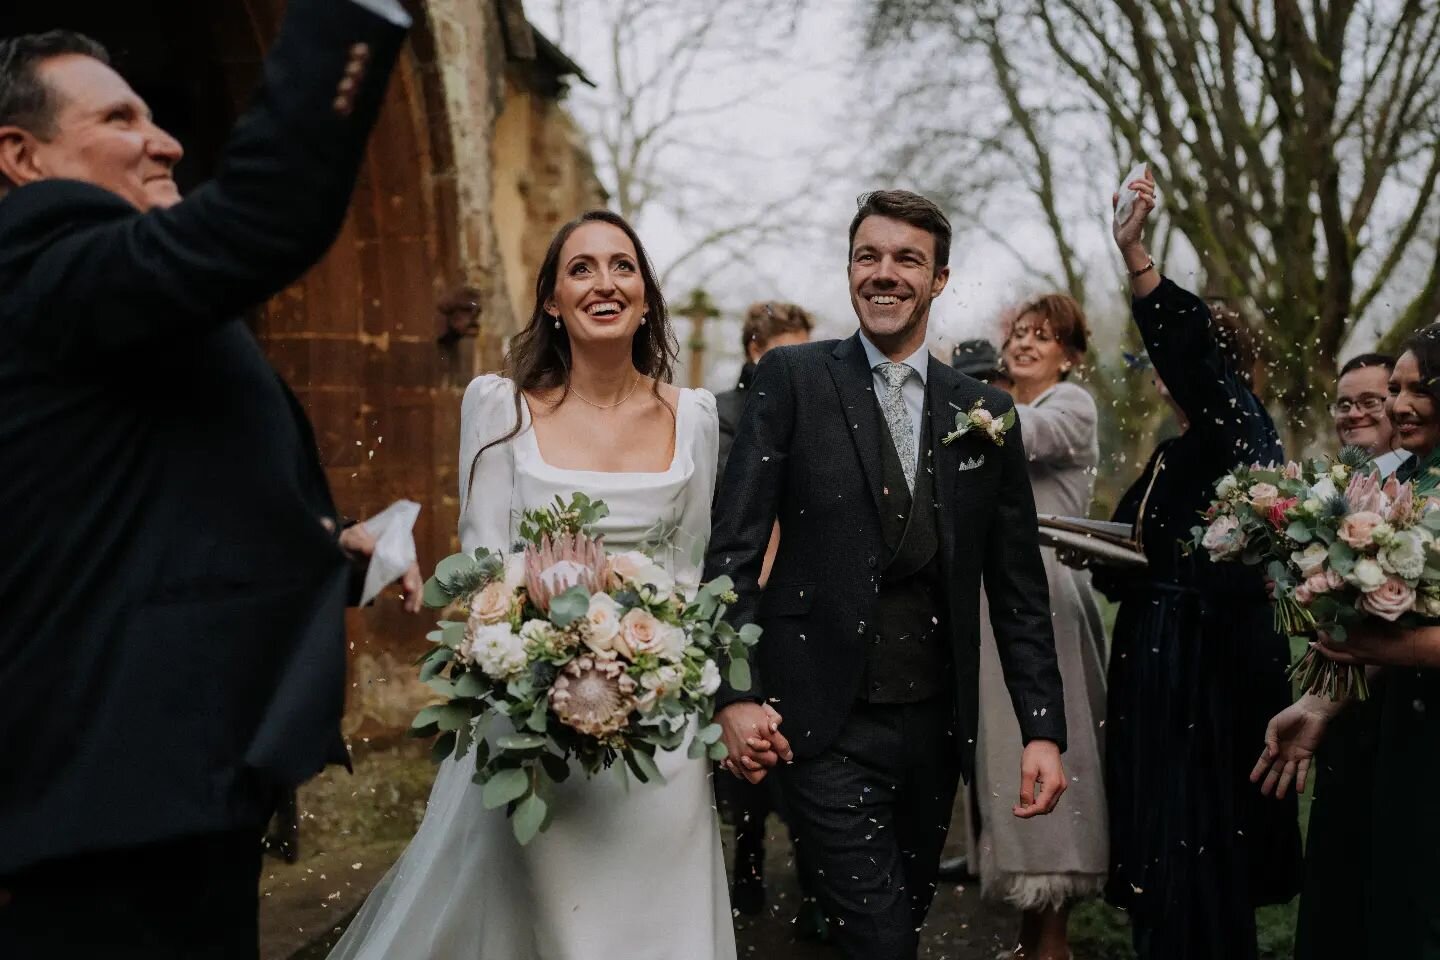 All the smiles from Noelle &amp; Will after their village church ceremony 😊

Photo @ayellephoto
Hair @cambridgebridalhaircompany
Mua @cambridgemakeupartist

#bridalbouqet #bridesbouquet #buttonhole #confettishot #confetti #justmarried #weddingday #w